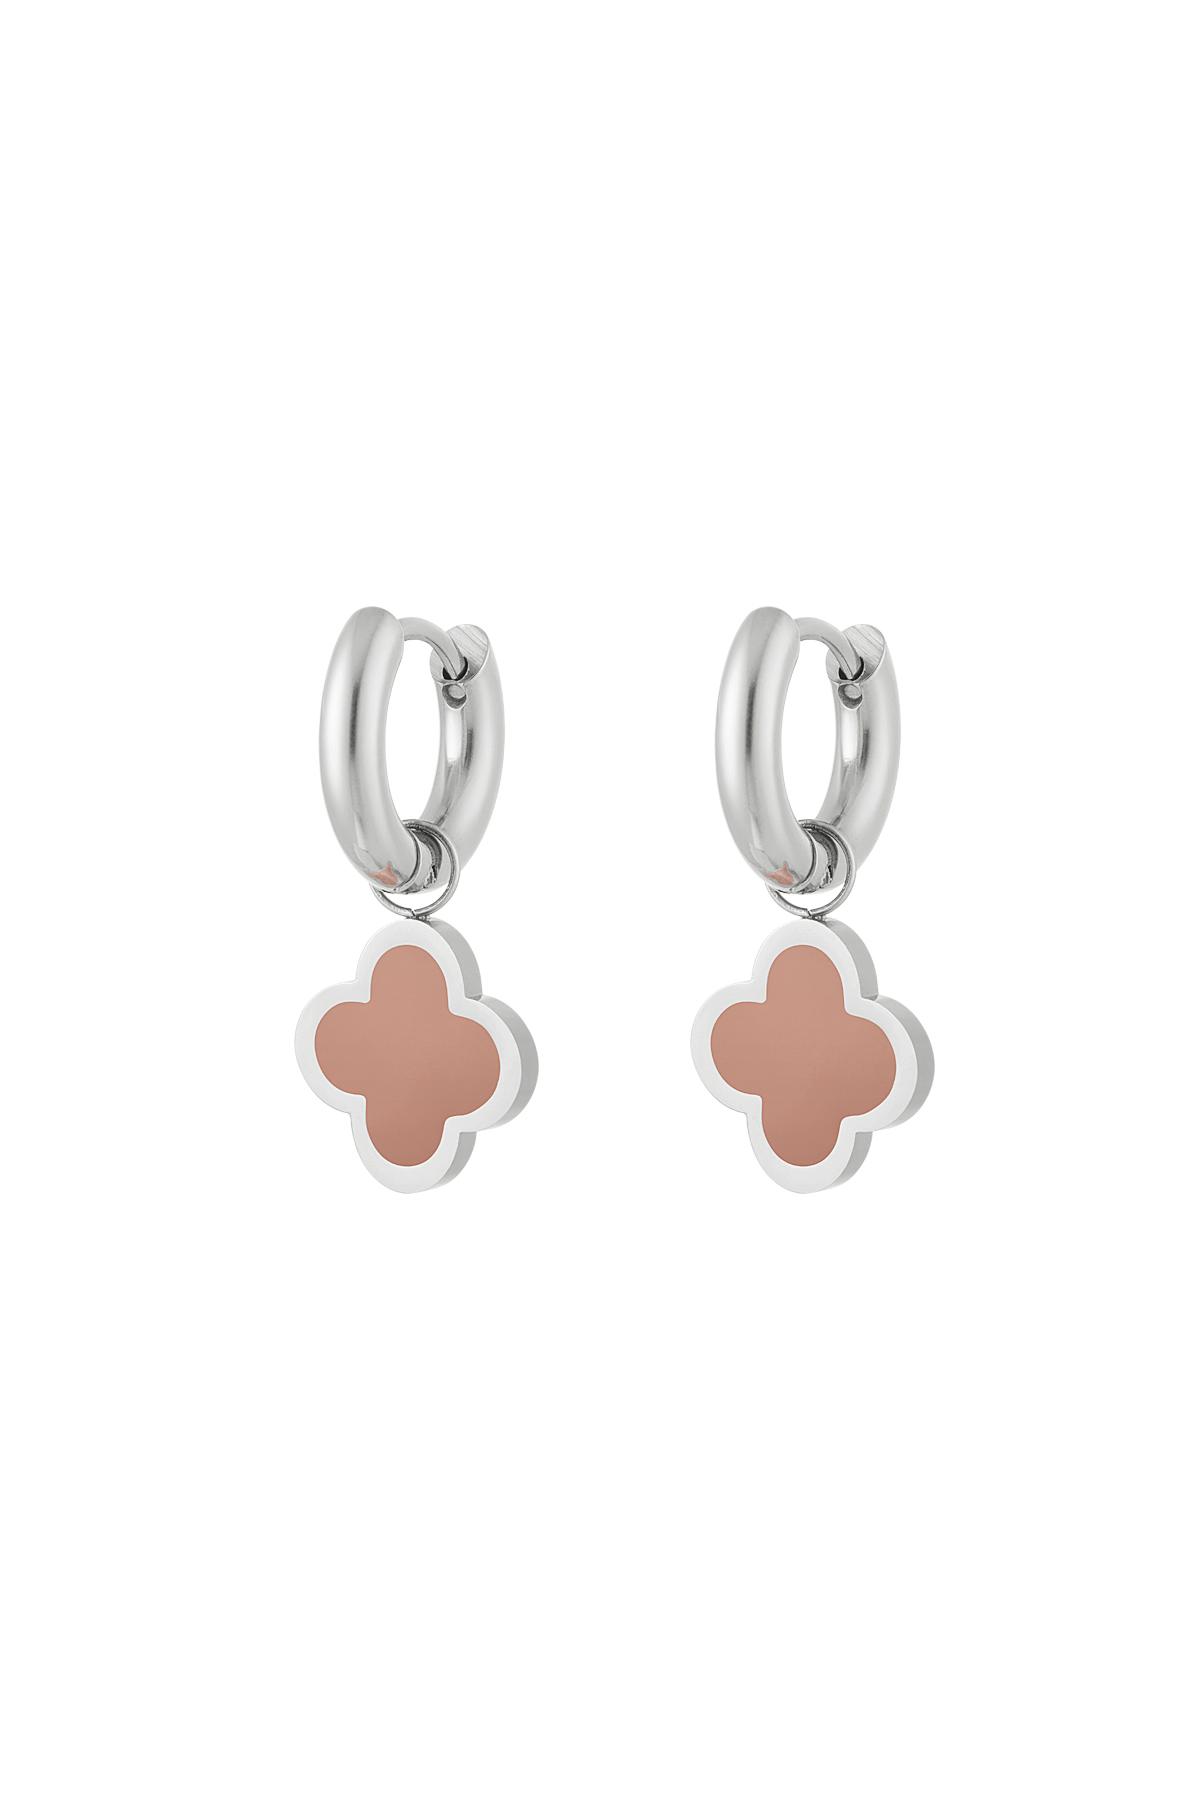 Earrings clover simple colorful Pink & Silver Stainless Steel h5 